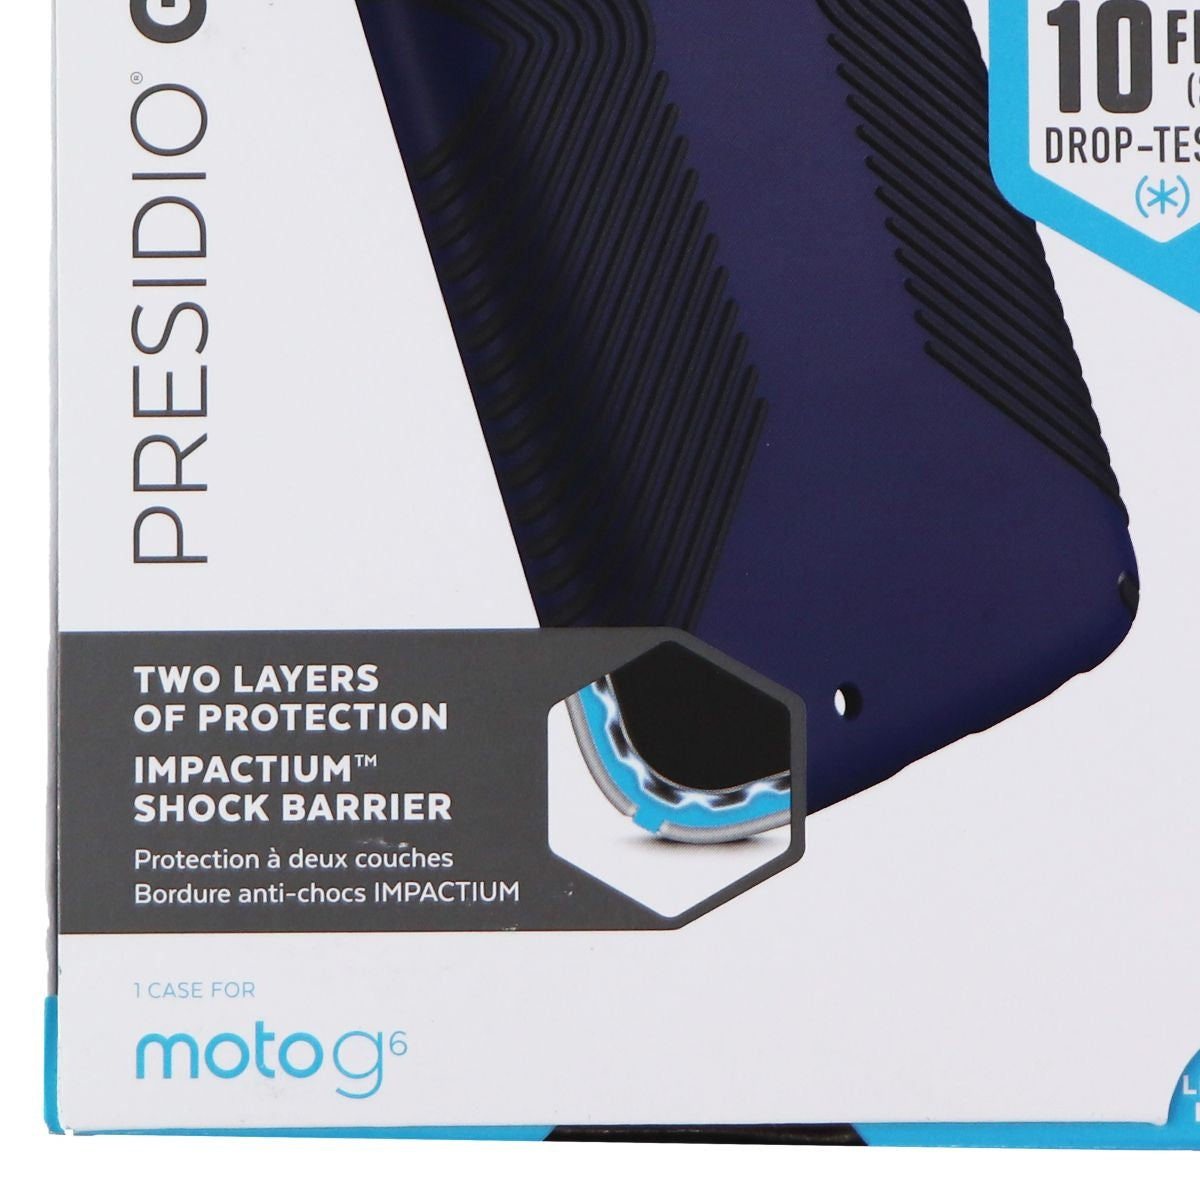 Speck Presidio Grip Hybrid Case for Motorola Moto G6 - Eclipse Blue/Carbon Black Cell Phone - Cases, Covers & Skins Speck    - Simple Cell Bulk Wholesale Pricing - USA Seller